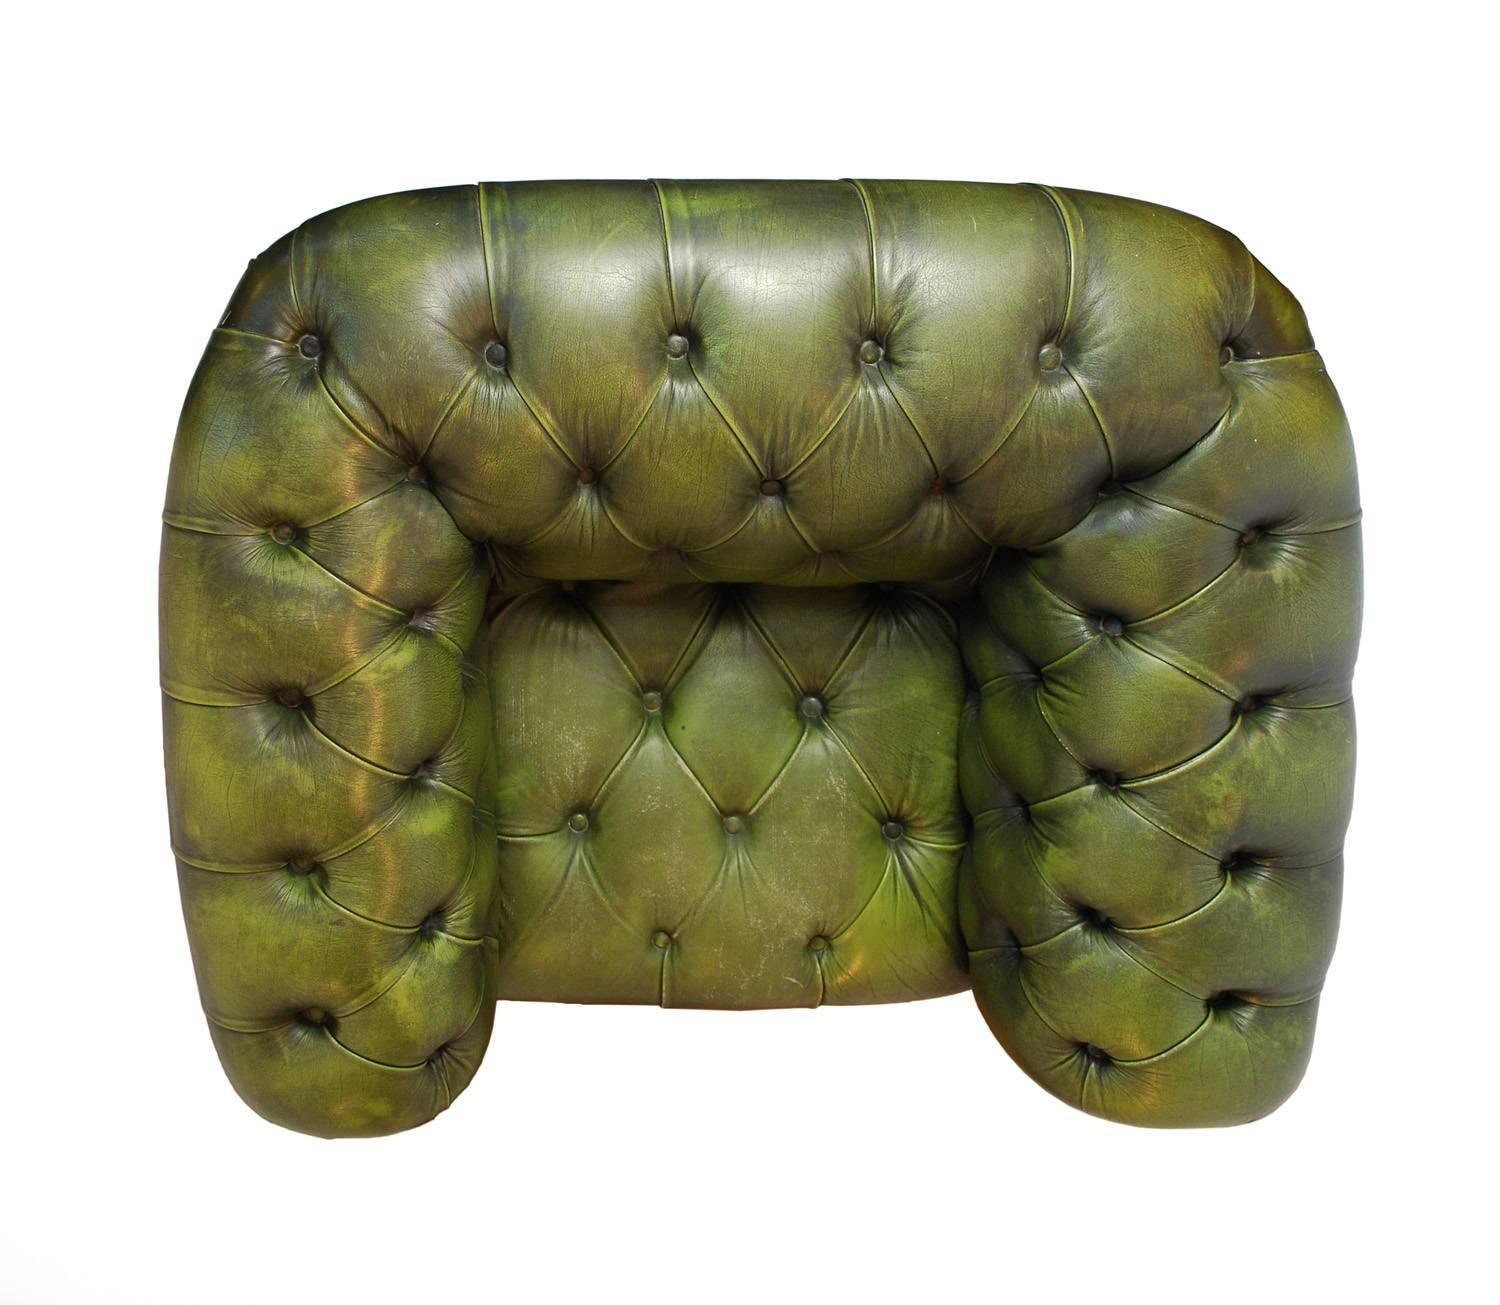 A very handsome Chesterfield tufted leather club chair in distressed deep green. Classic features include nailhead trim and bun feet. Well proportioned and very comfortable.

Generally good vintage condition, substantial wear on the leather